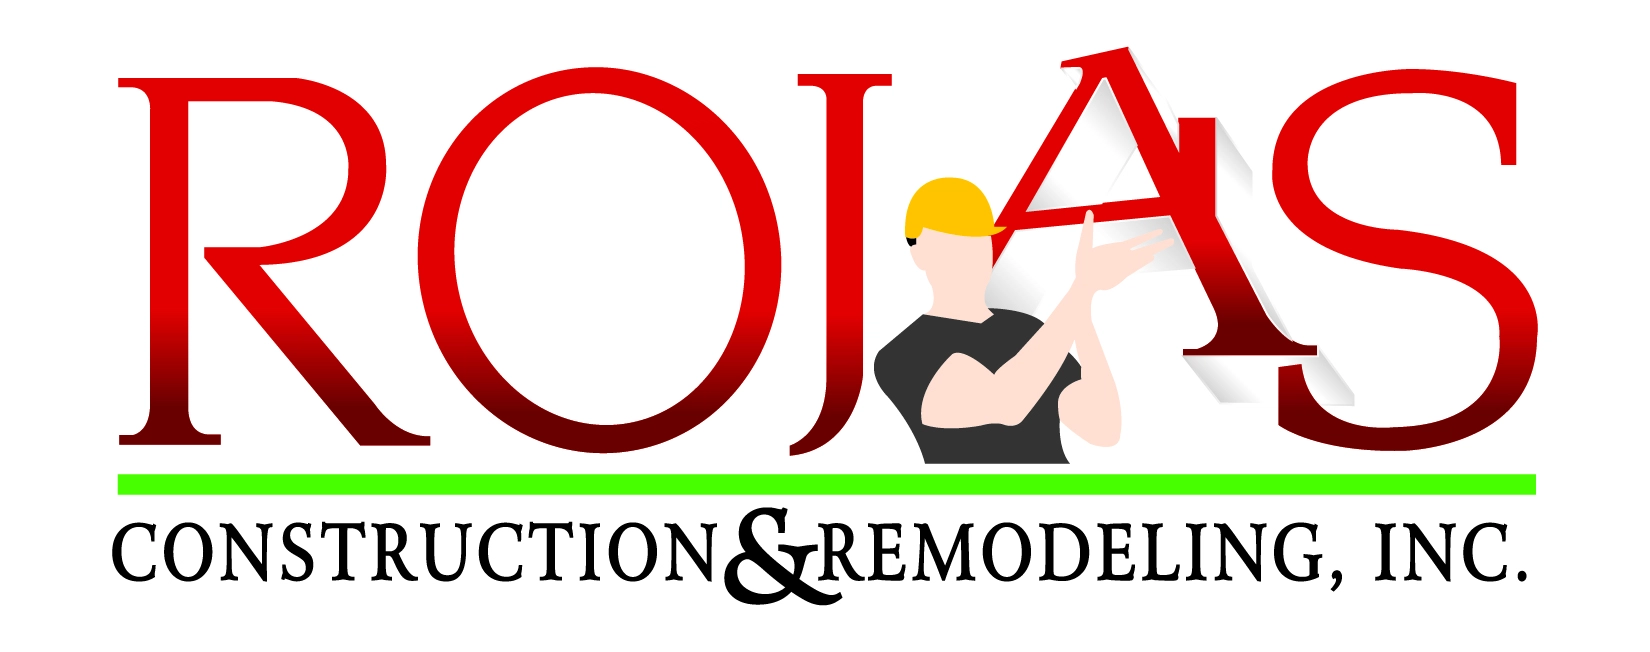 Rojas Construction and Remodeling, Inc. Logo